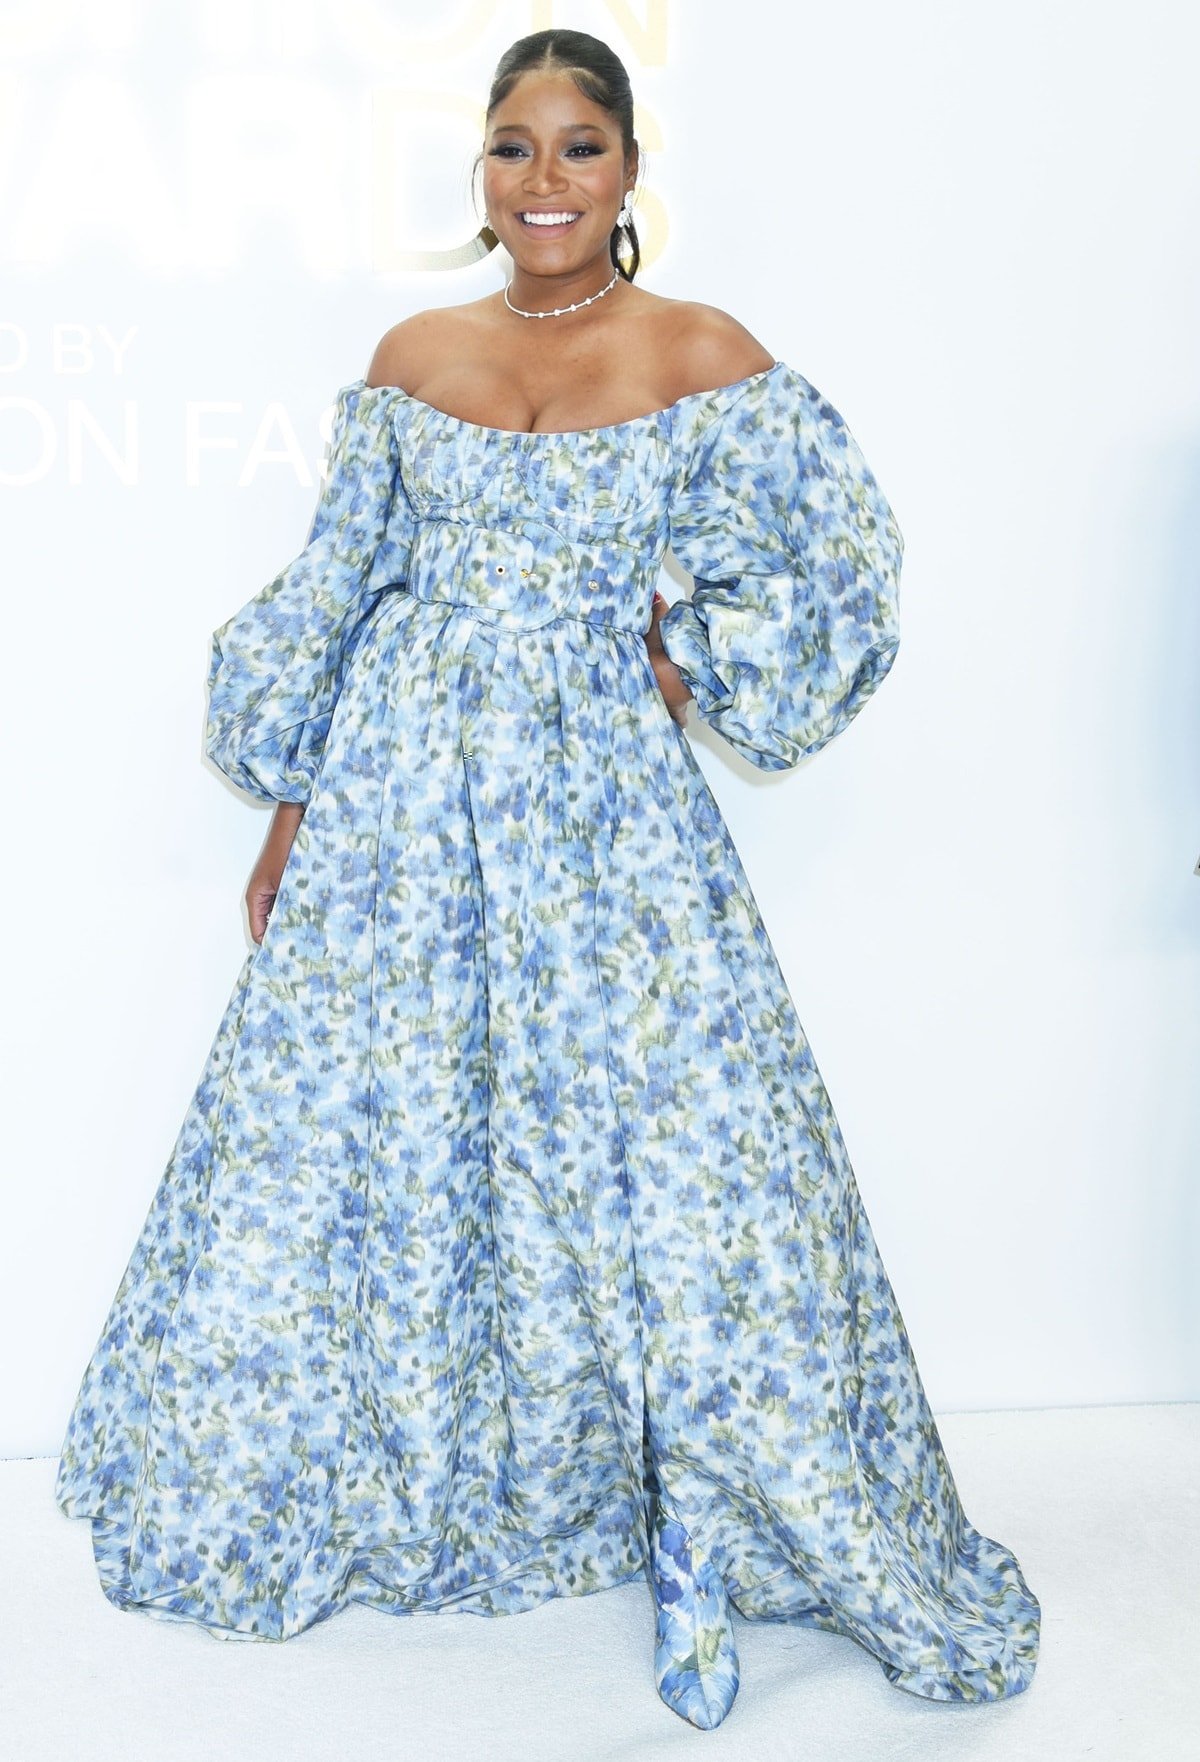 Keke Palmer made a stunning appearance at the CFDA Fashion Awards in a floral gown from Carolina Herrera's spring 2023 "Secret Garden" runway show